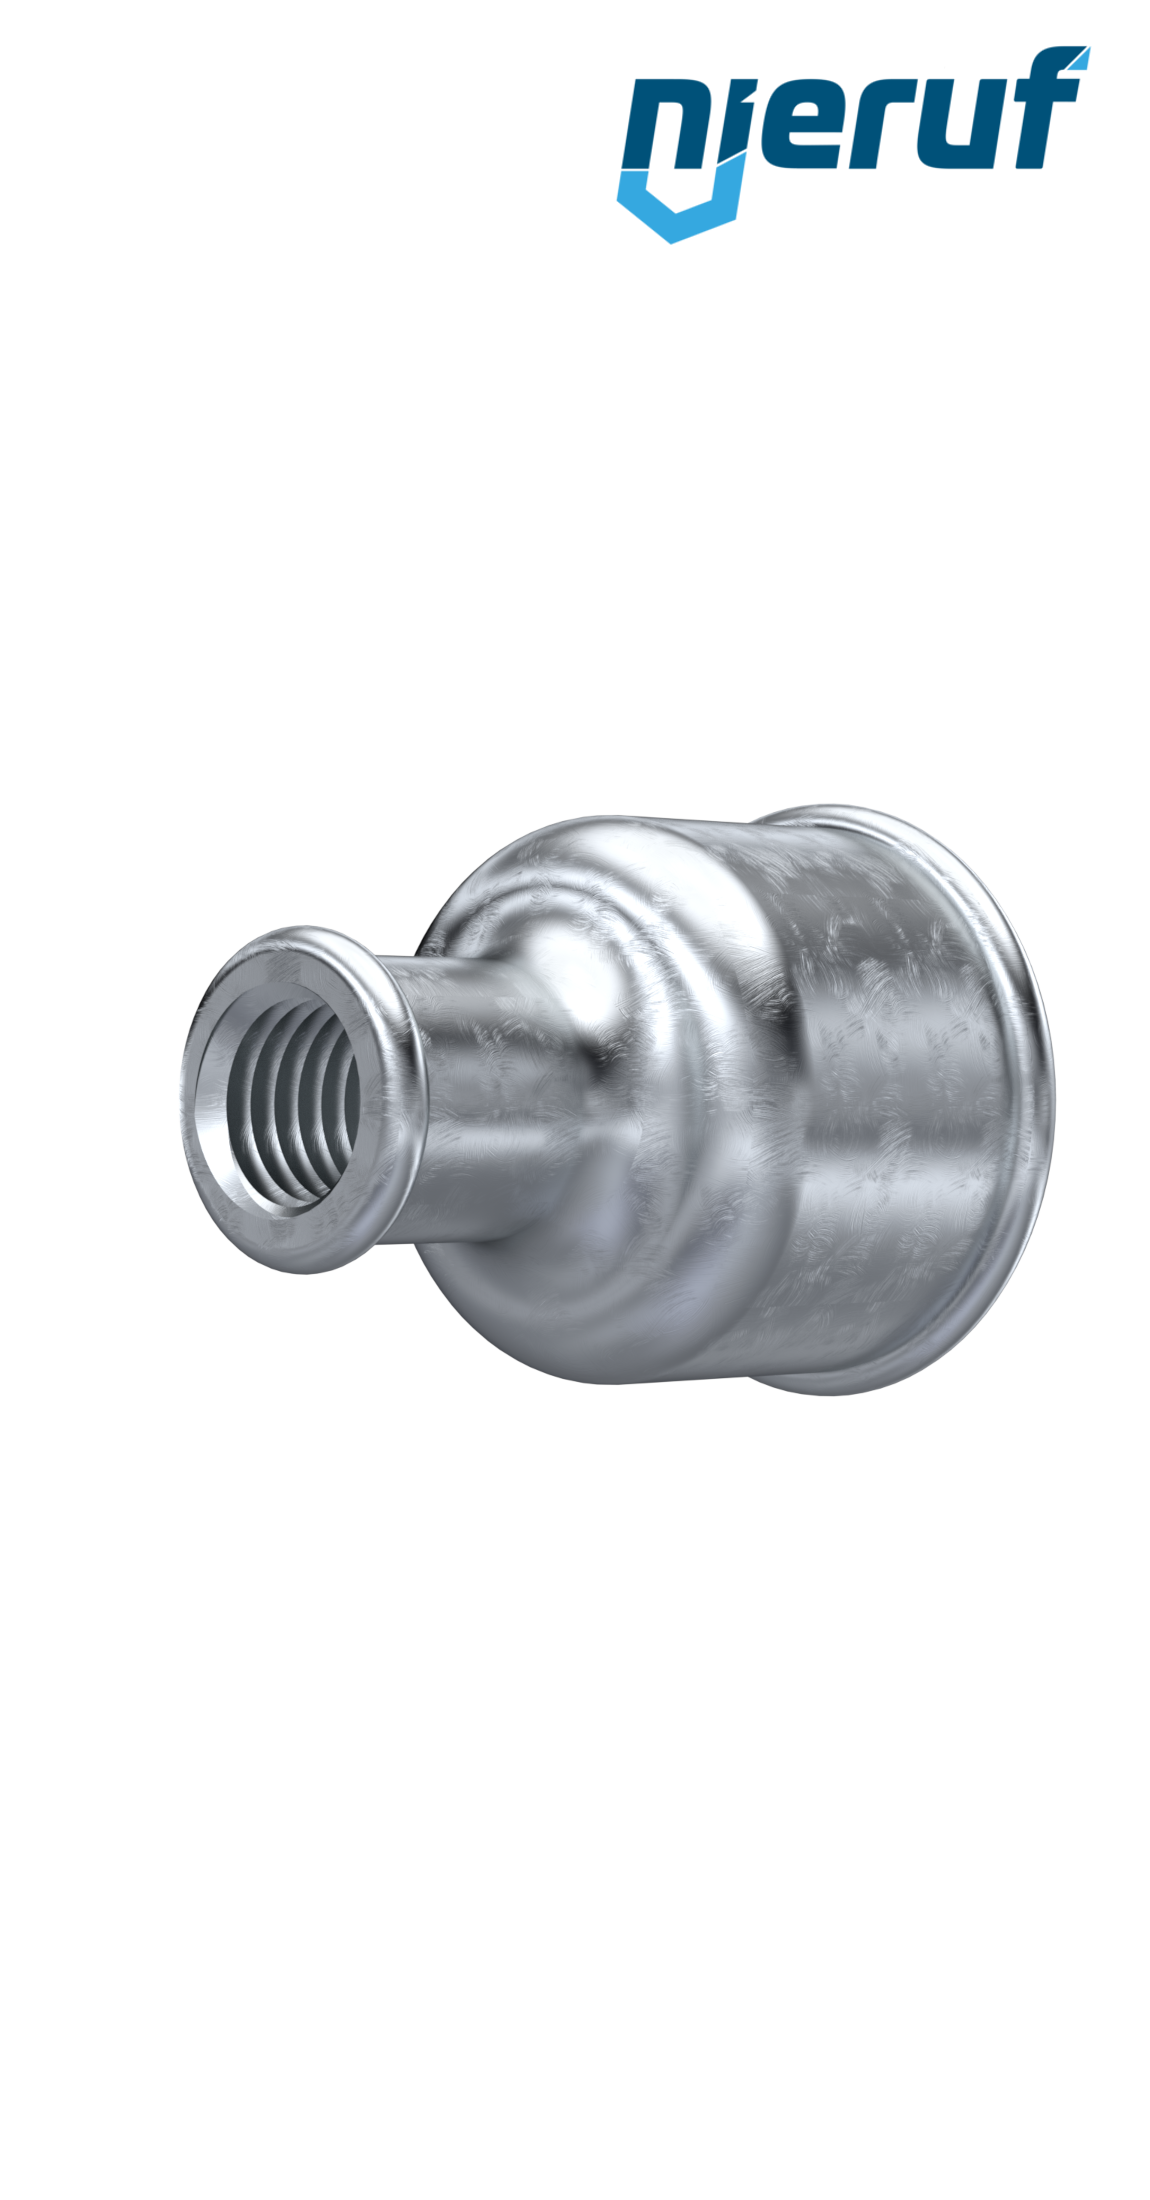 Malleable cast iron fitting reducing socket no. 240, 2" x 1/2" inch galvanized